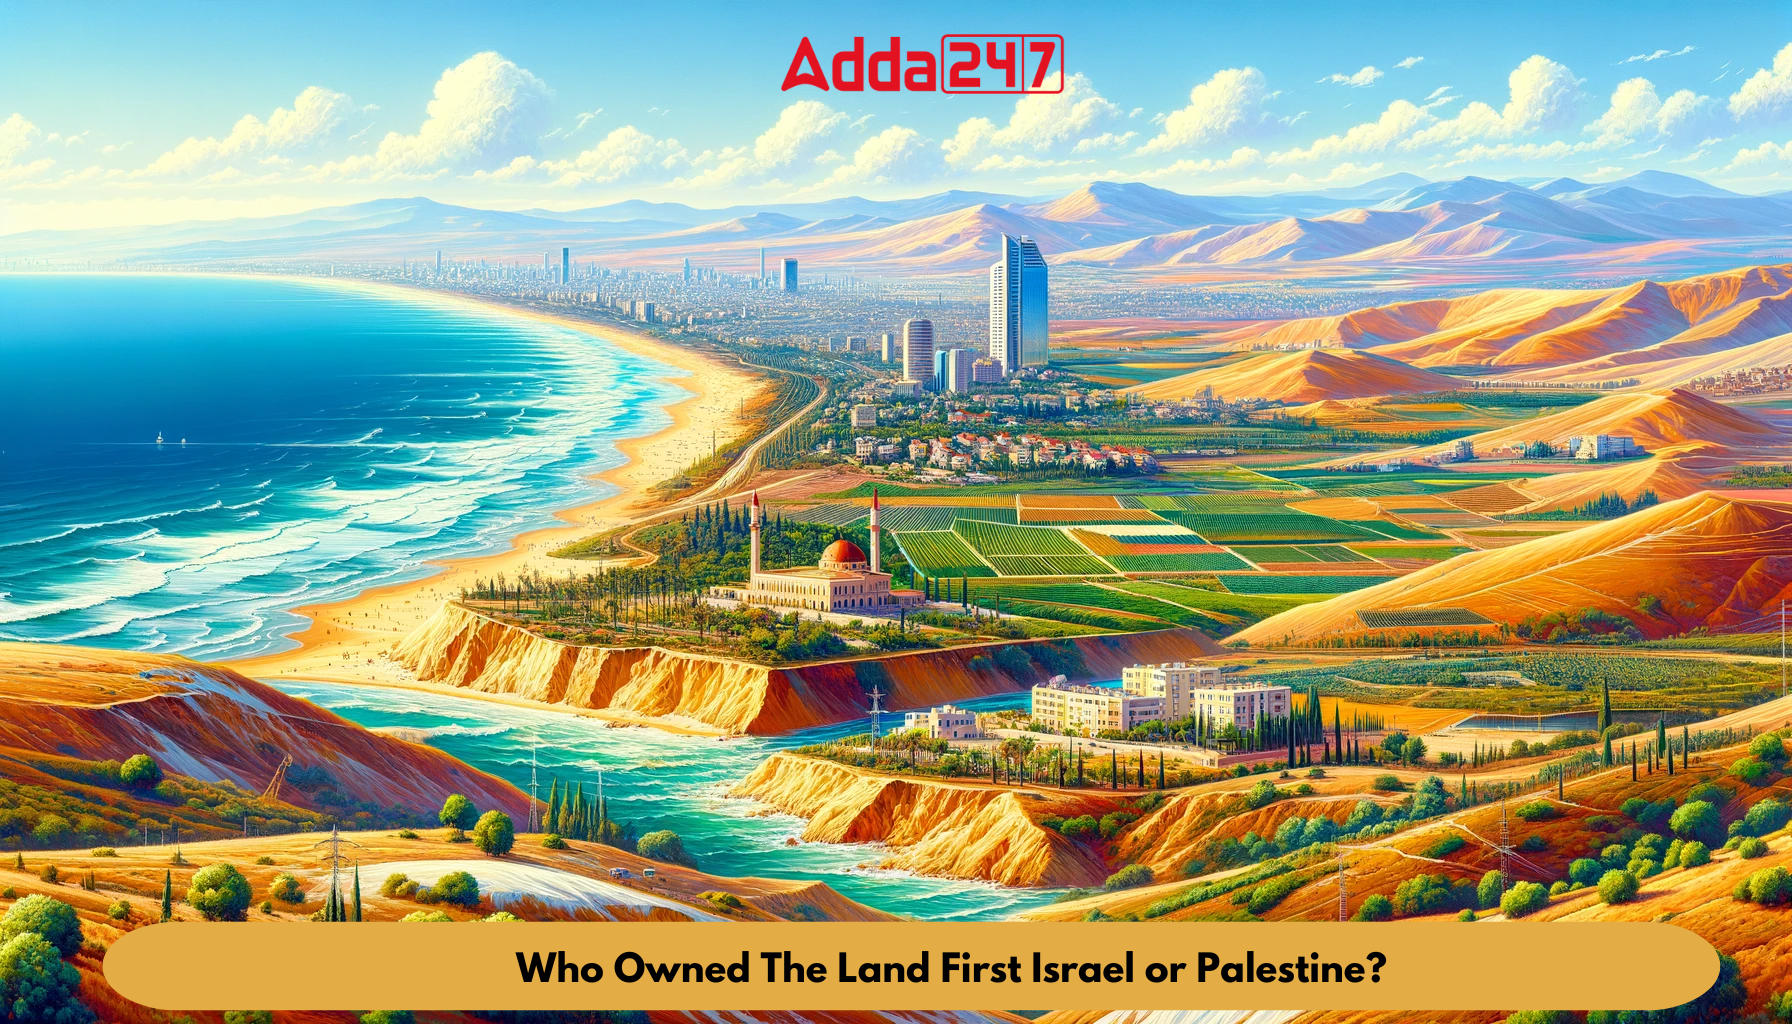 Who Owned The Land First Israel or Palestine?